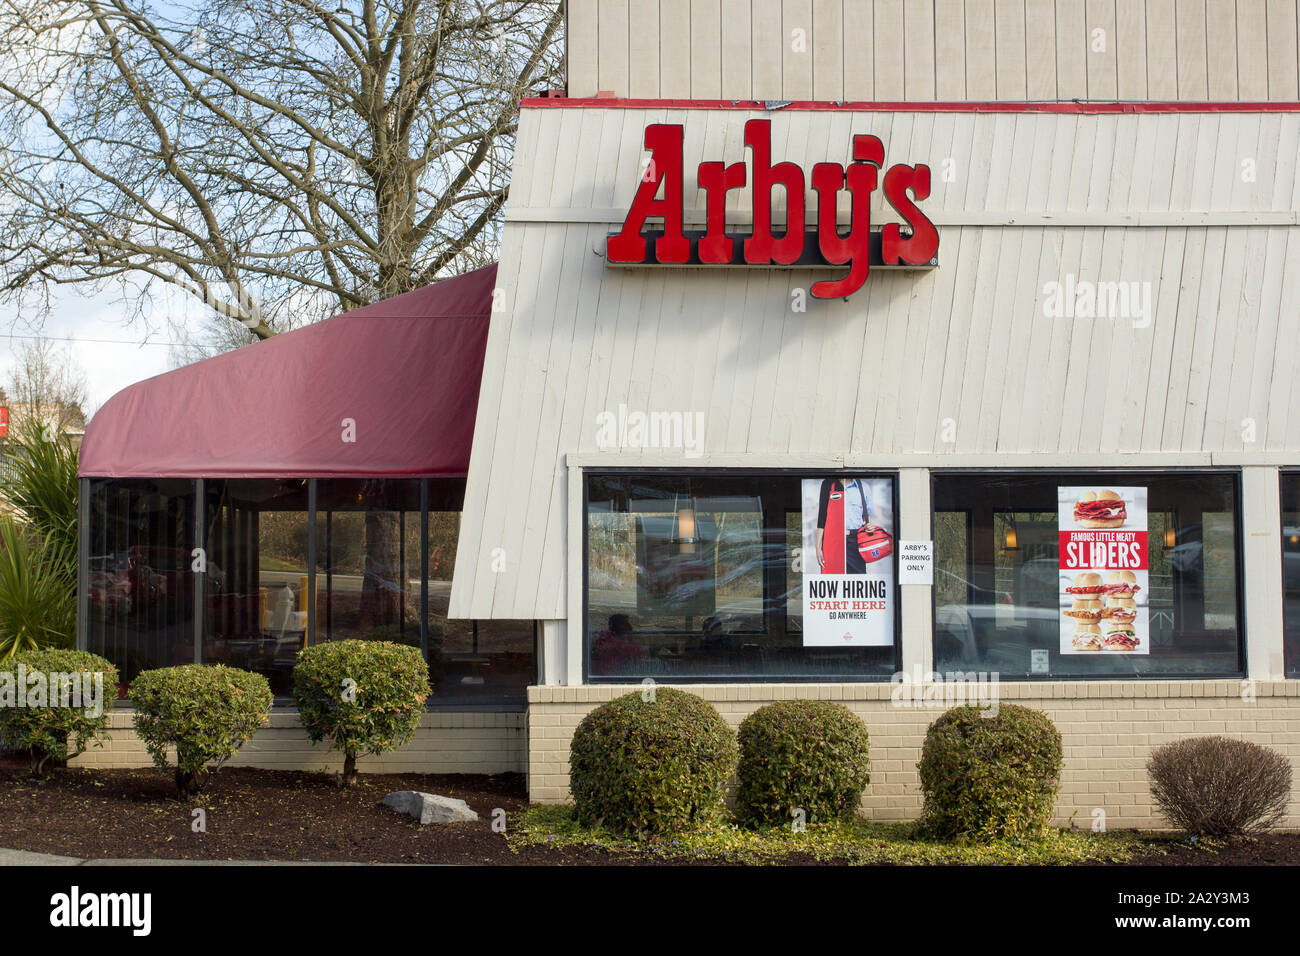 Beaverton, Oregon - Mar 12, 2019: The exterior of an Arby's restaurant. Arby's is an American quick-service fast-food sandwich restaurant chain. Stock Photo